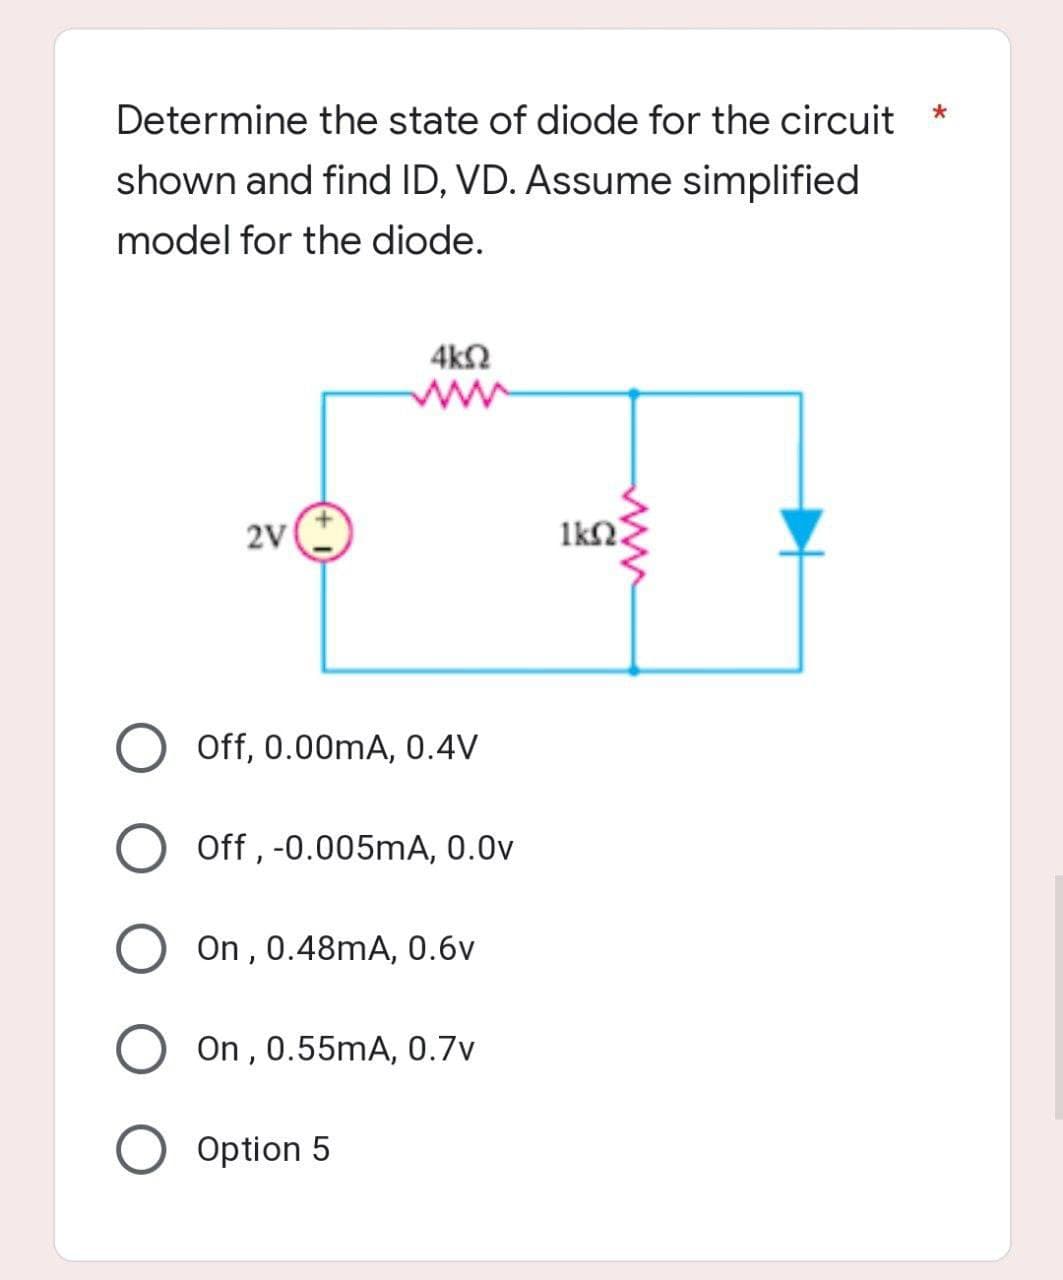 Determine the state of diode for the circuit
*
shown and find ID, VD. Assume simplified
model for the diode.
4kQ
2V
Off, 0.00mA, 0.4V
Off, -0.005mA, 0.0v
On, 0.48mA, 0.6v
On, 0.55mA, 0.7v
O Option 5
www.
1k0.